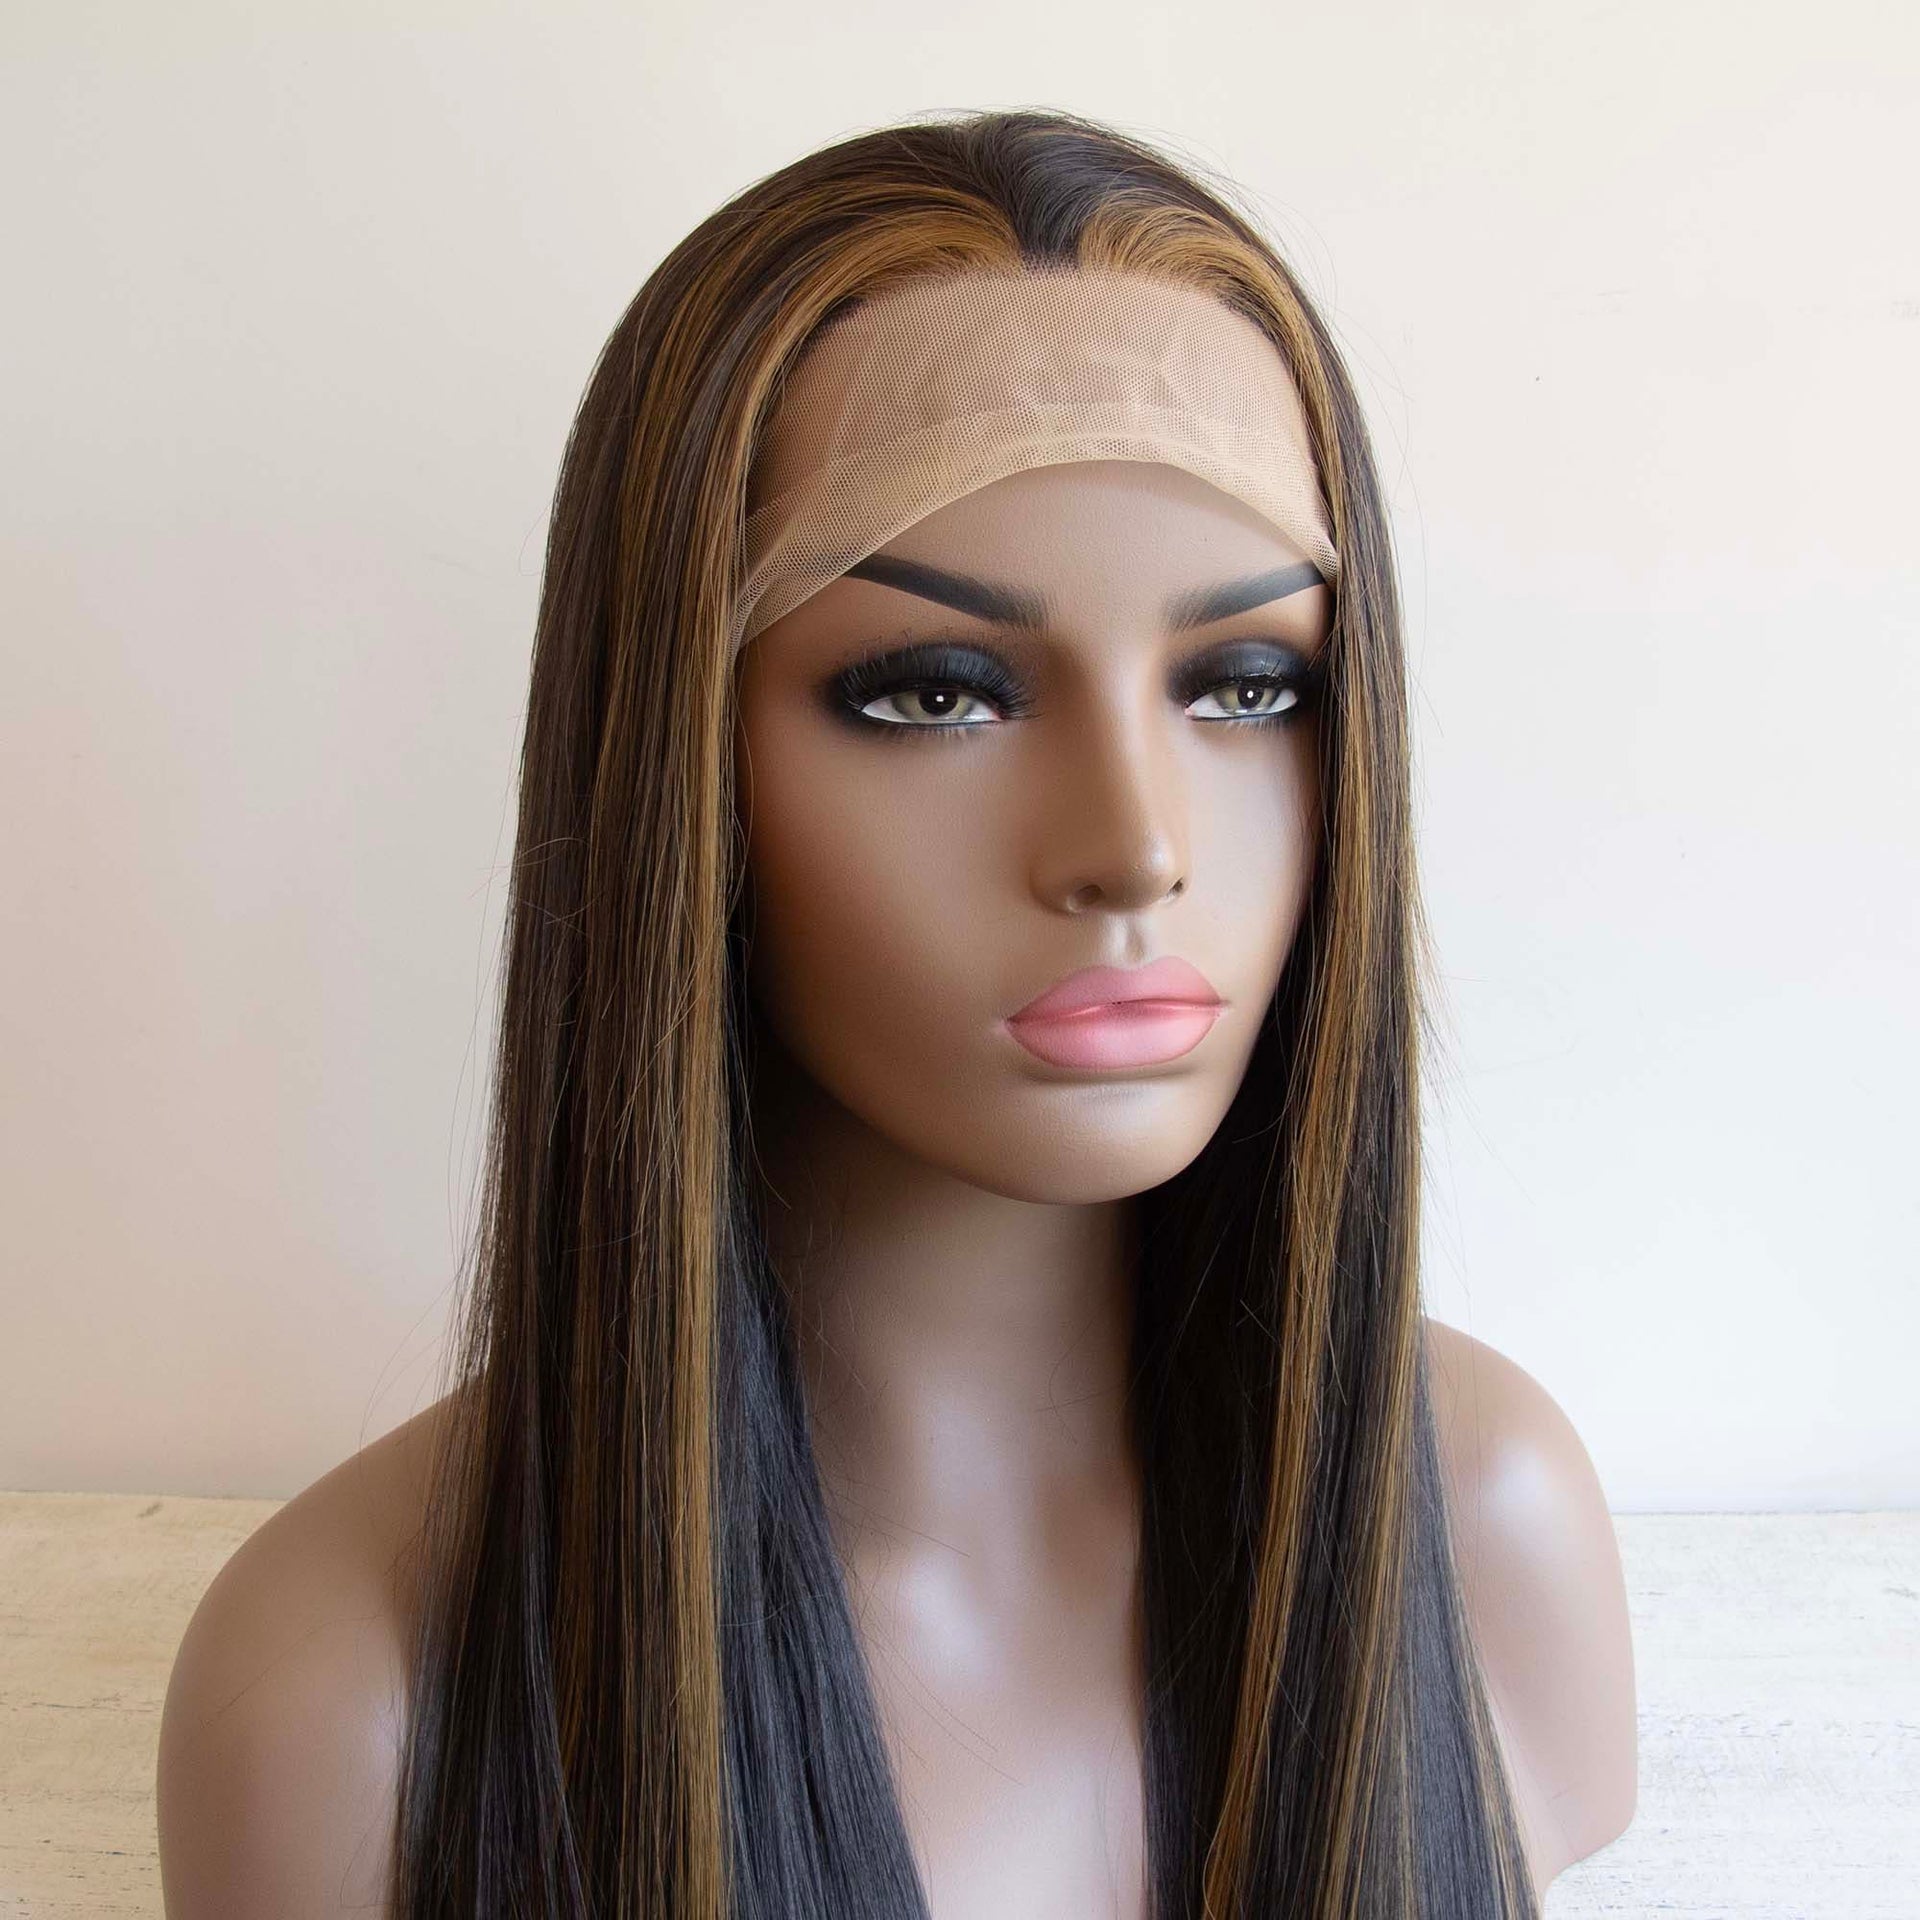 nevermindyrhead Women Black Honey Blonde Highlight Lace Front Slicked Long Straight Hair Wig 24 Inches